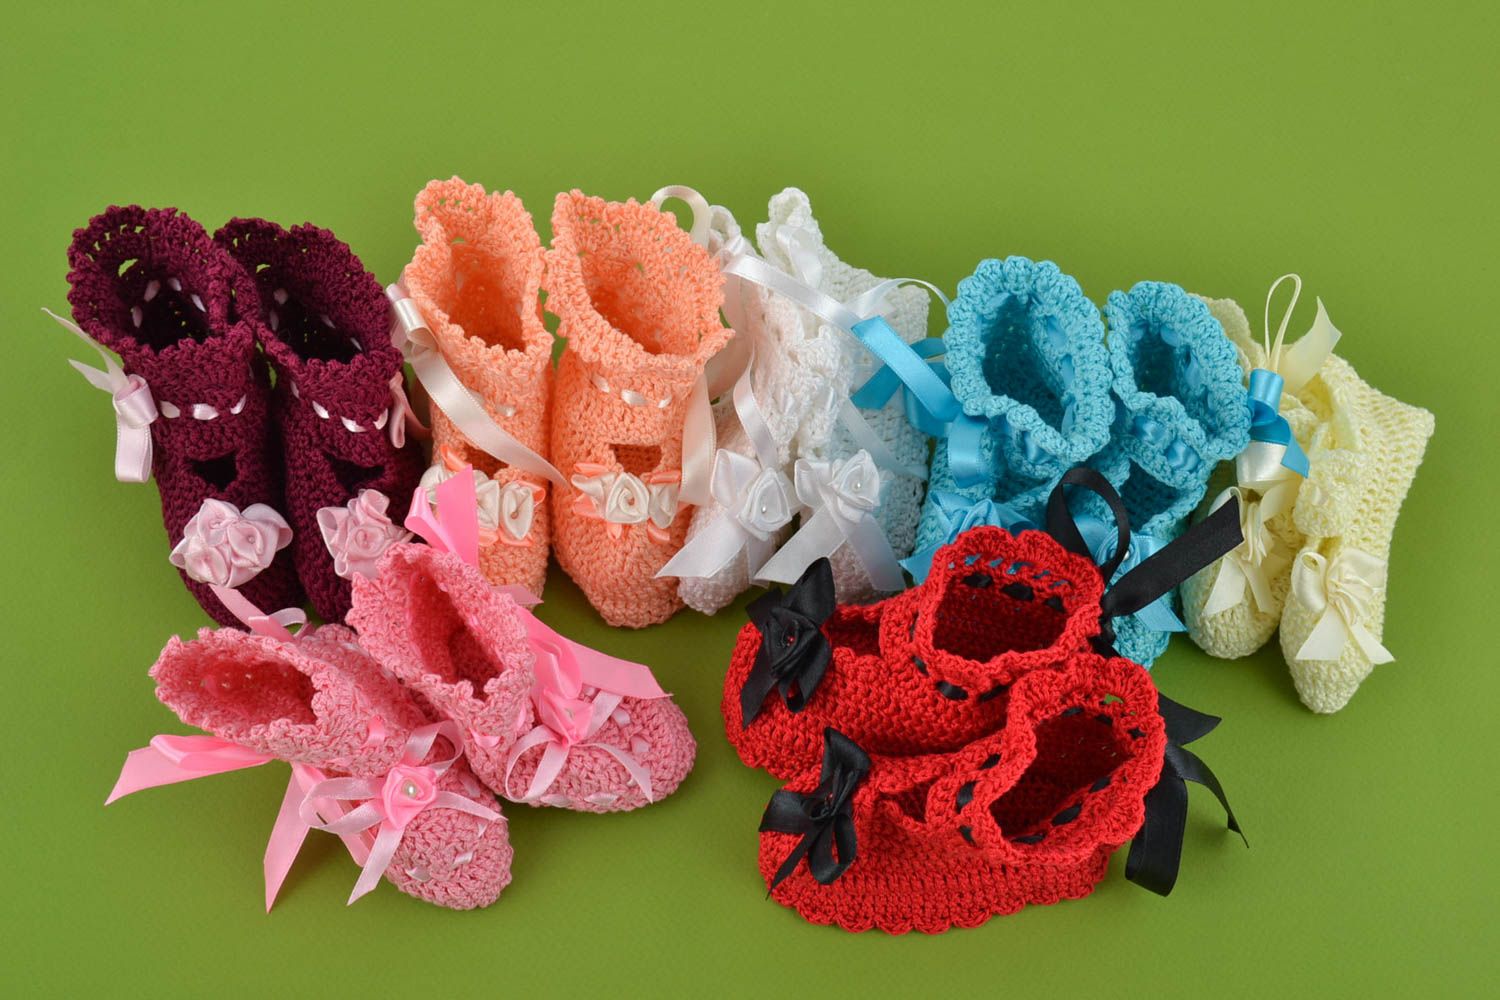 Set of handmade colorful bright crocheted baby booties with ribbons 7 pairs photo 1